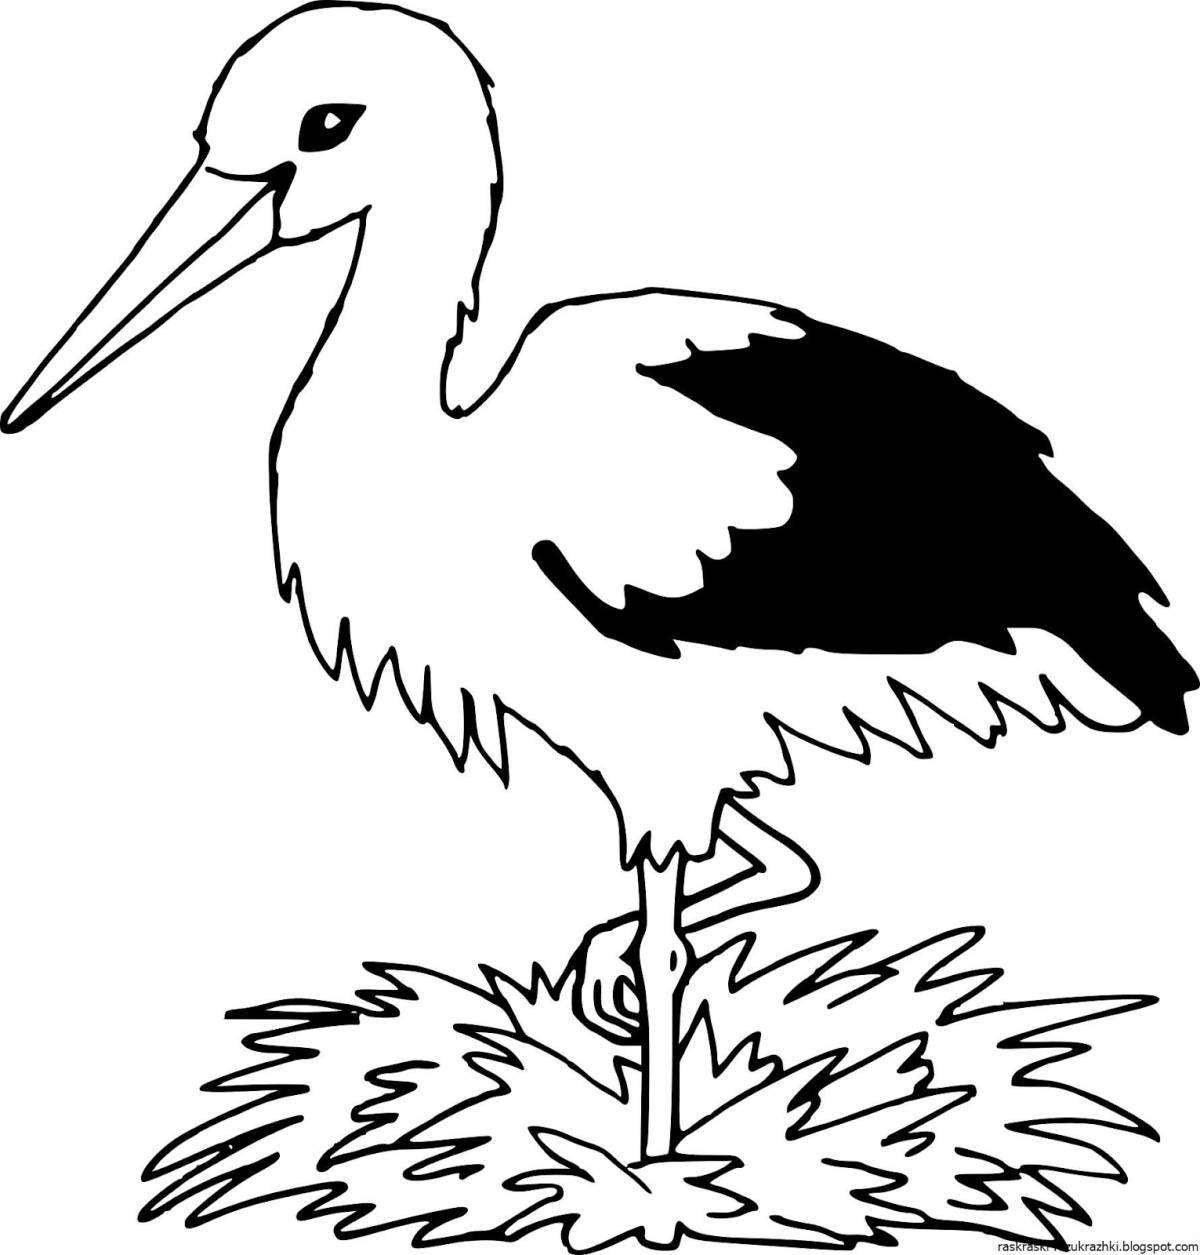 Fancy stork with baby coloring book